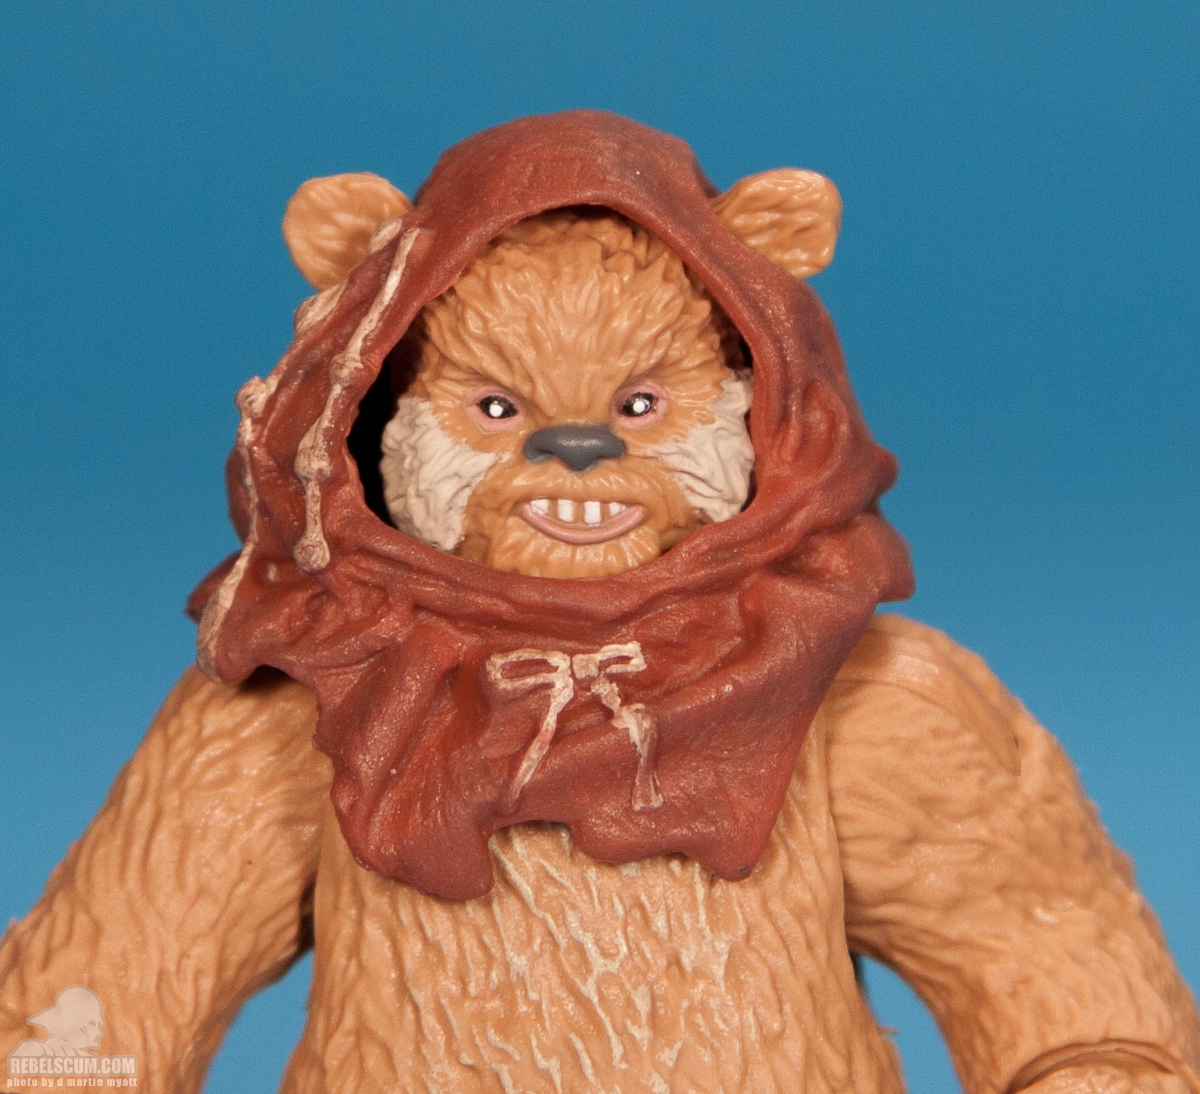 Ewok_Scouts_The_Vintage_Collection_TVC_Kmart-09.jpg